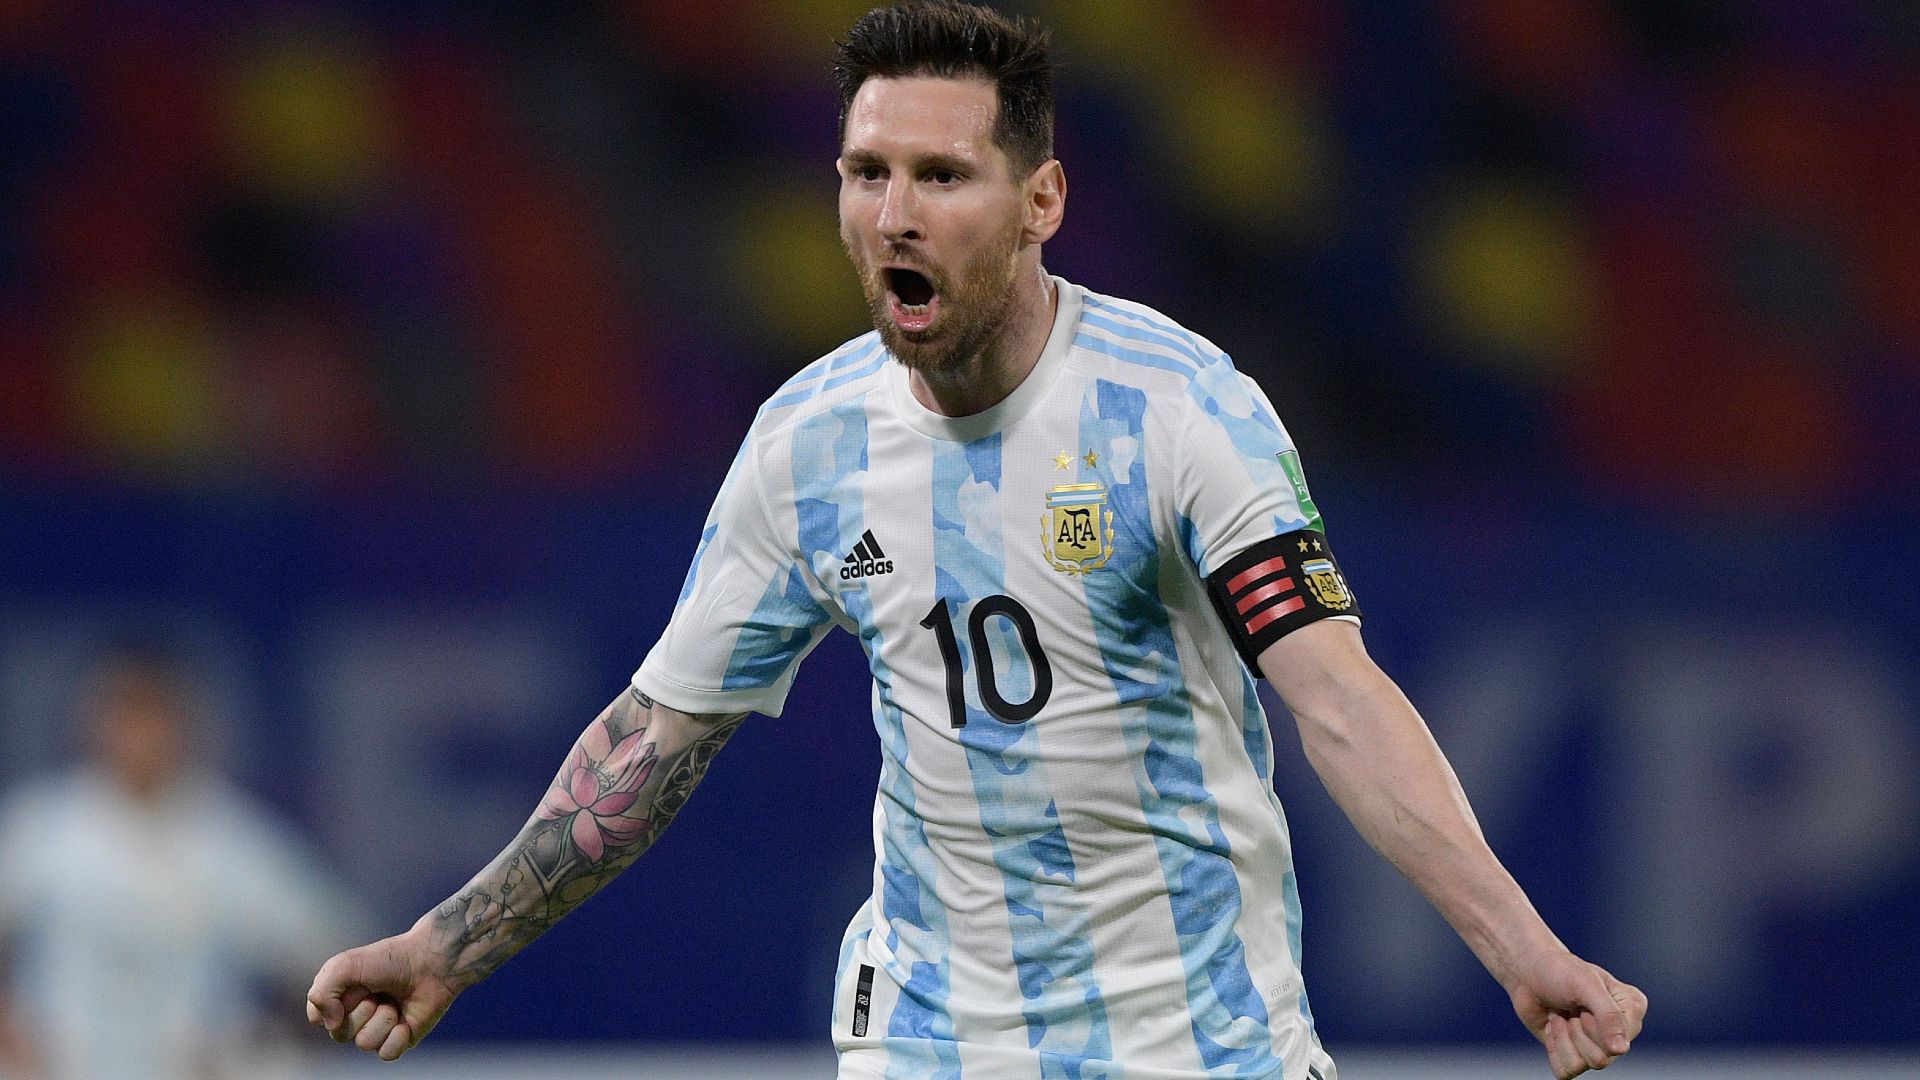 How to watch Argentina vs Chile in the Copa America 2021 from India?